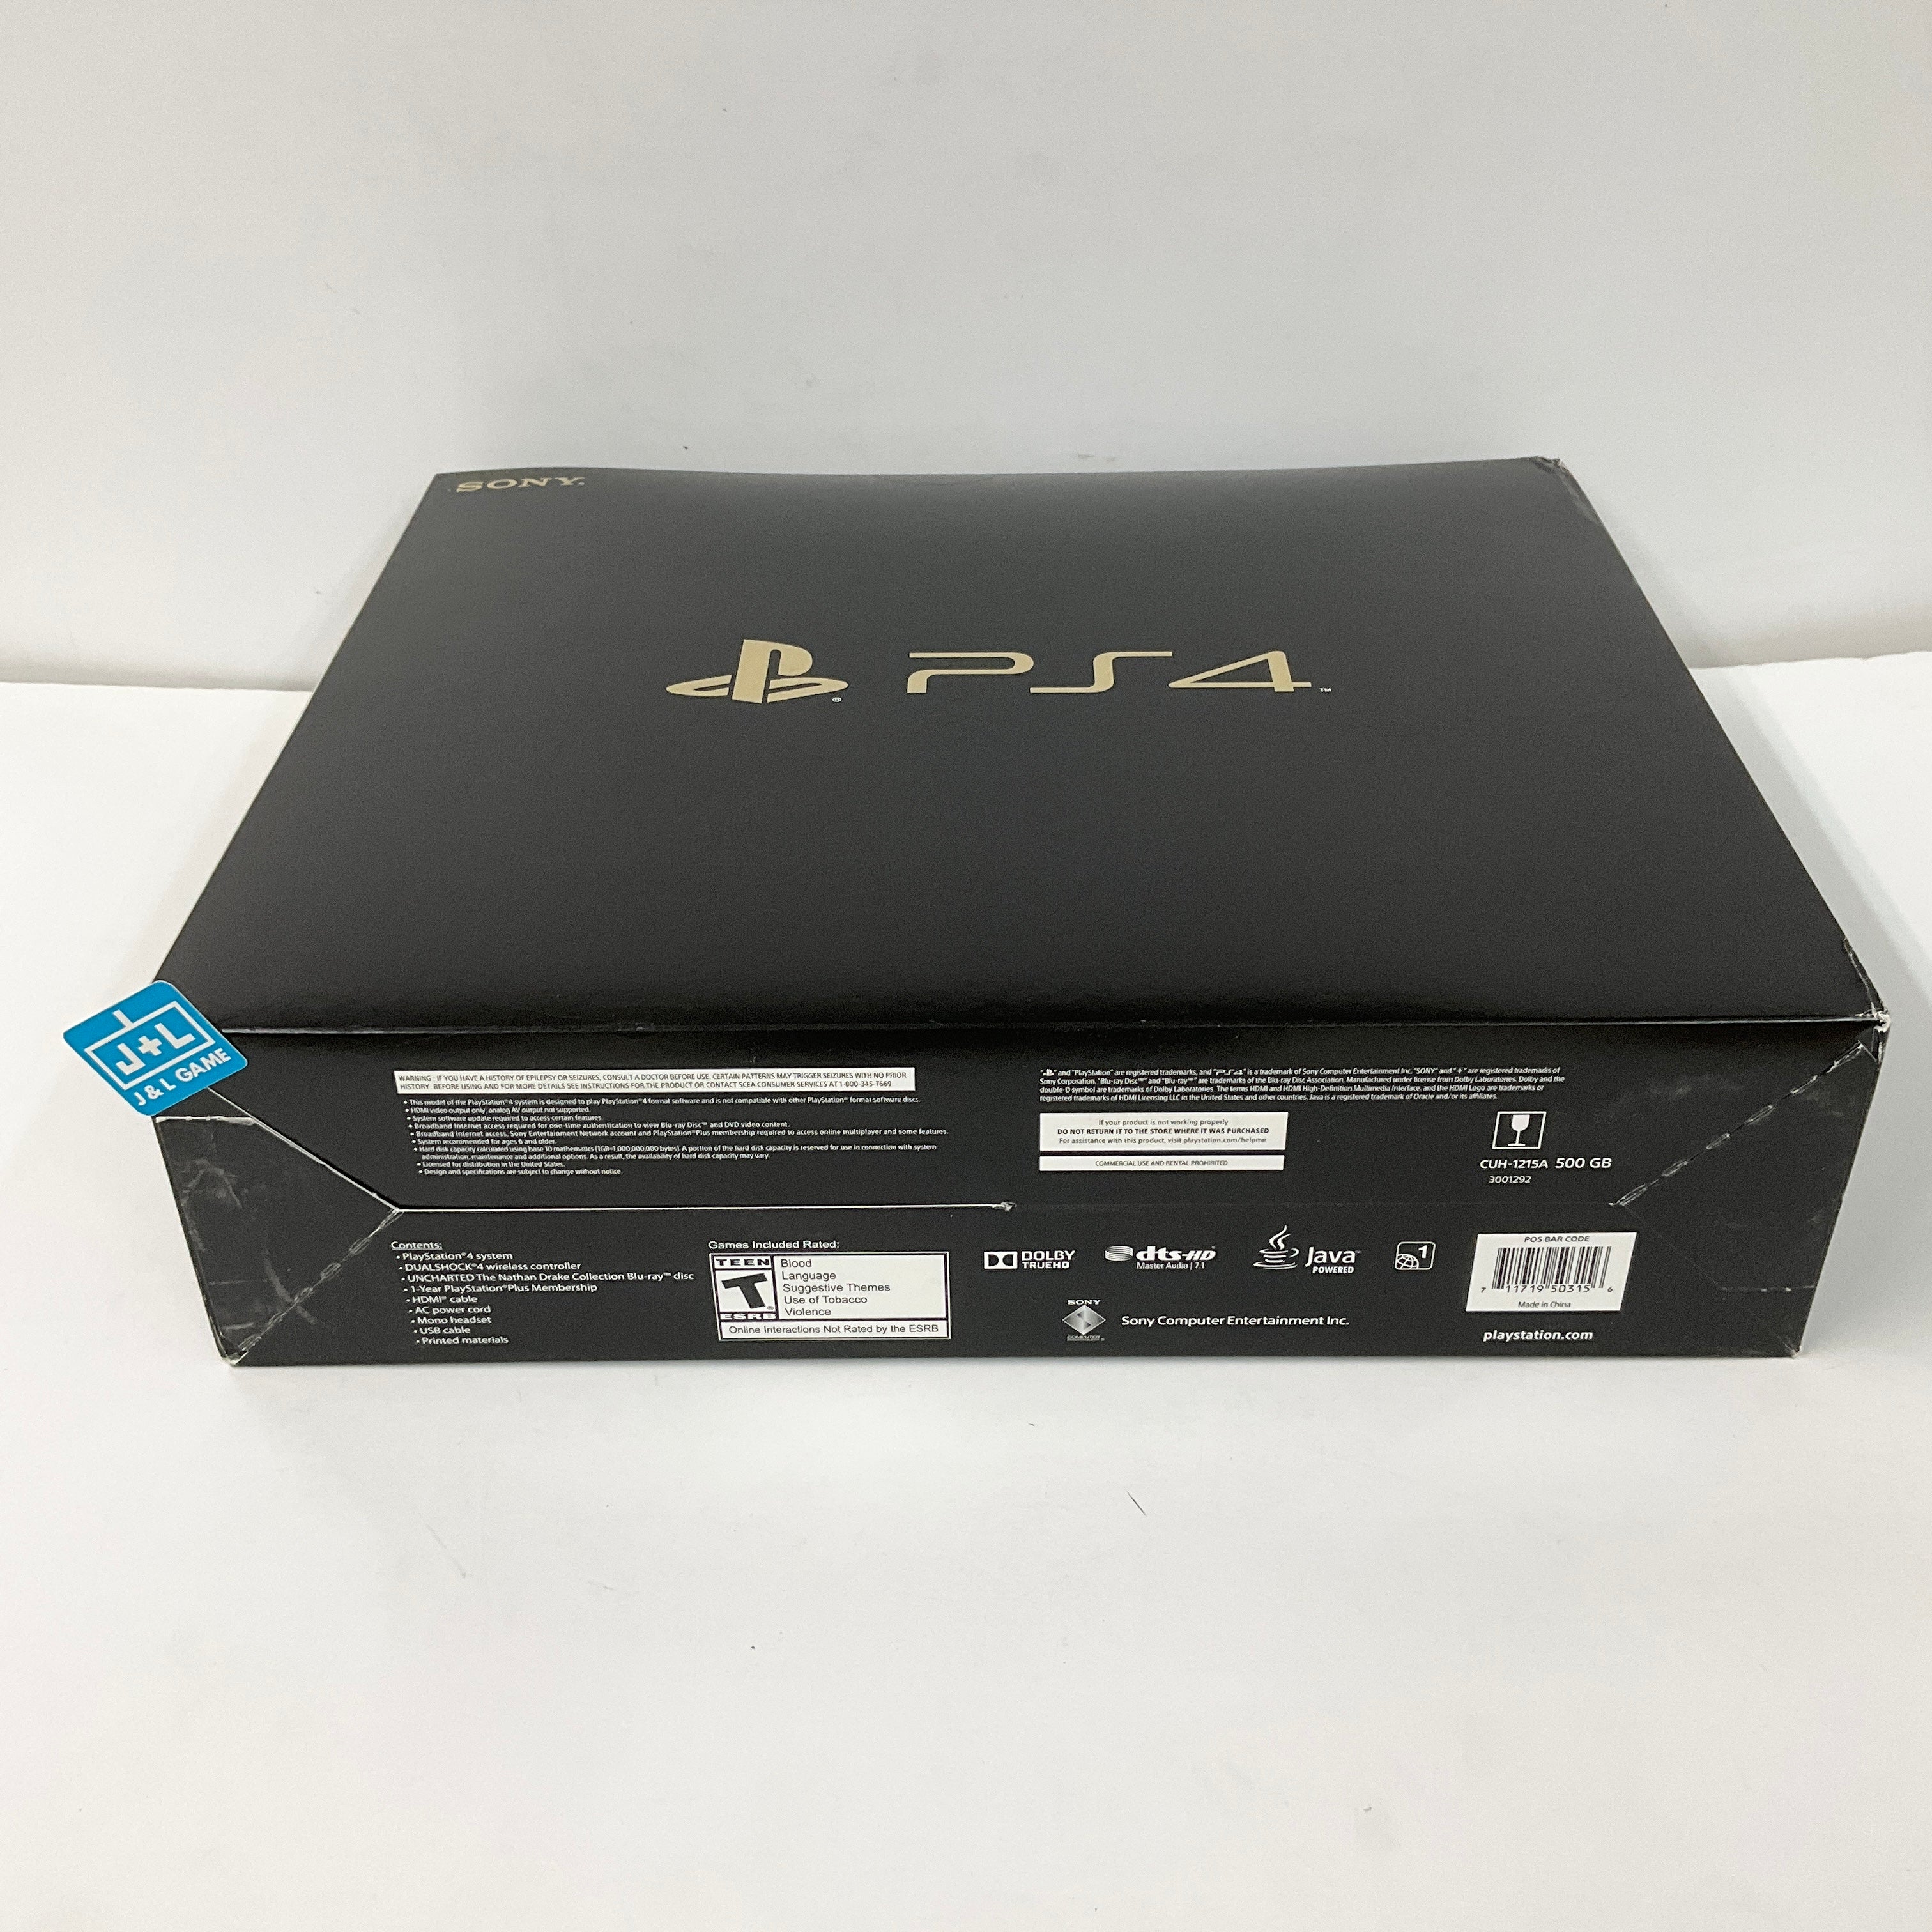 SONY PlayStation 4 (Taco Bell Gold Limited Edition Console) - (PS4) PlayStation 4 Consoles Sony   